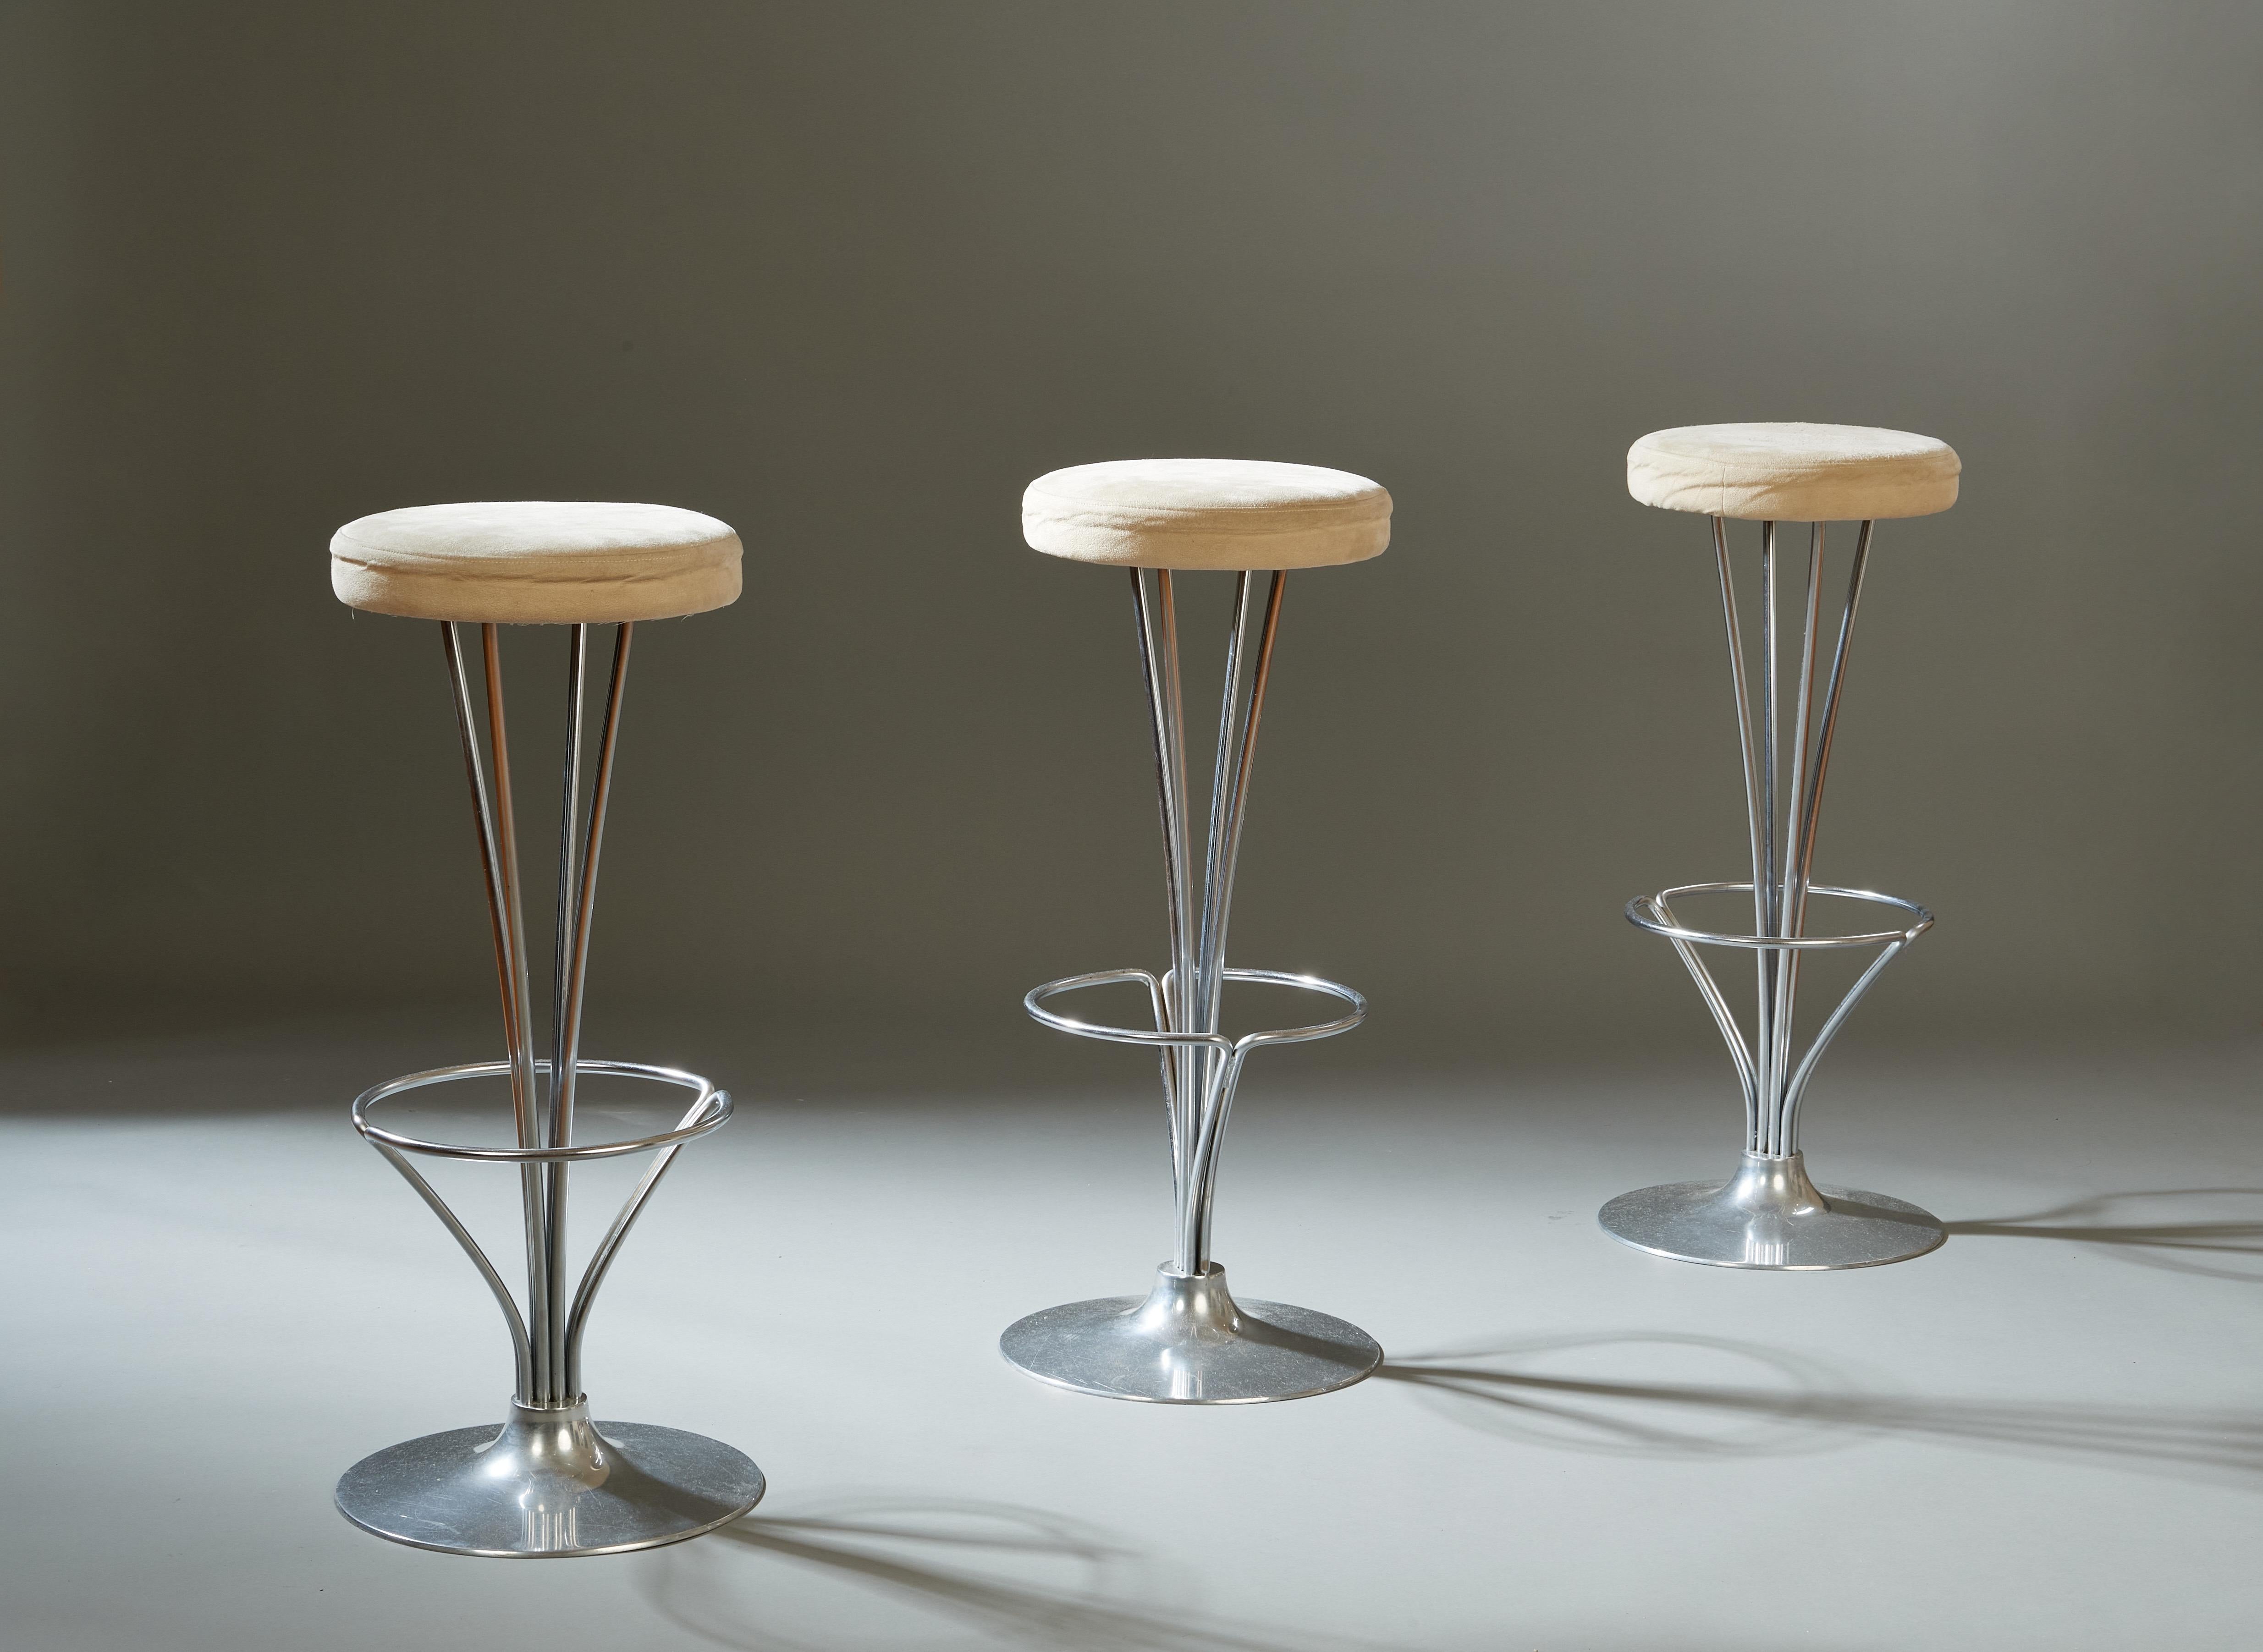 Piet Hein (1905-1996)

A set of three Danish Modern barstools by the poet, philosopher, and mathematician Piet Hein. A base in chromed steel curves outwards to support a comfortable seat in tan suede, which rises above a practical and elegant